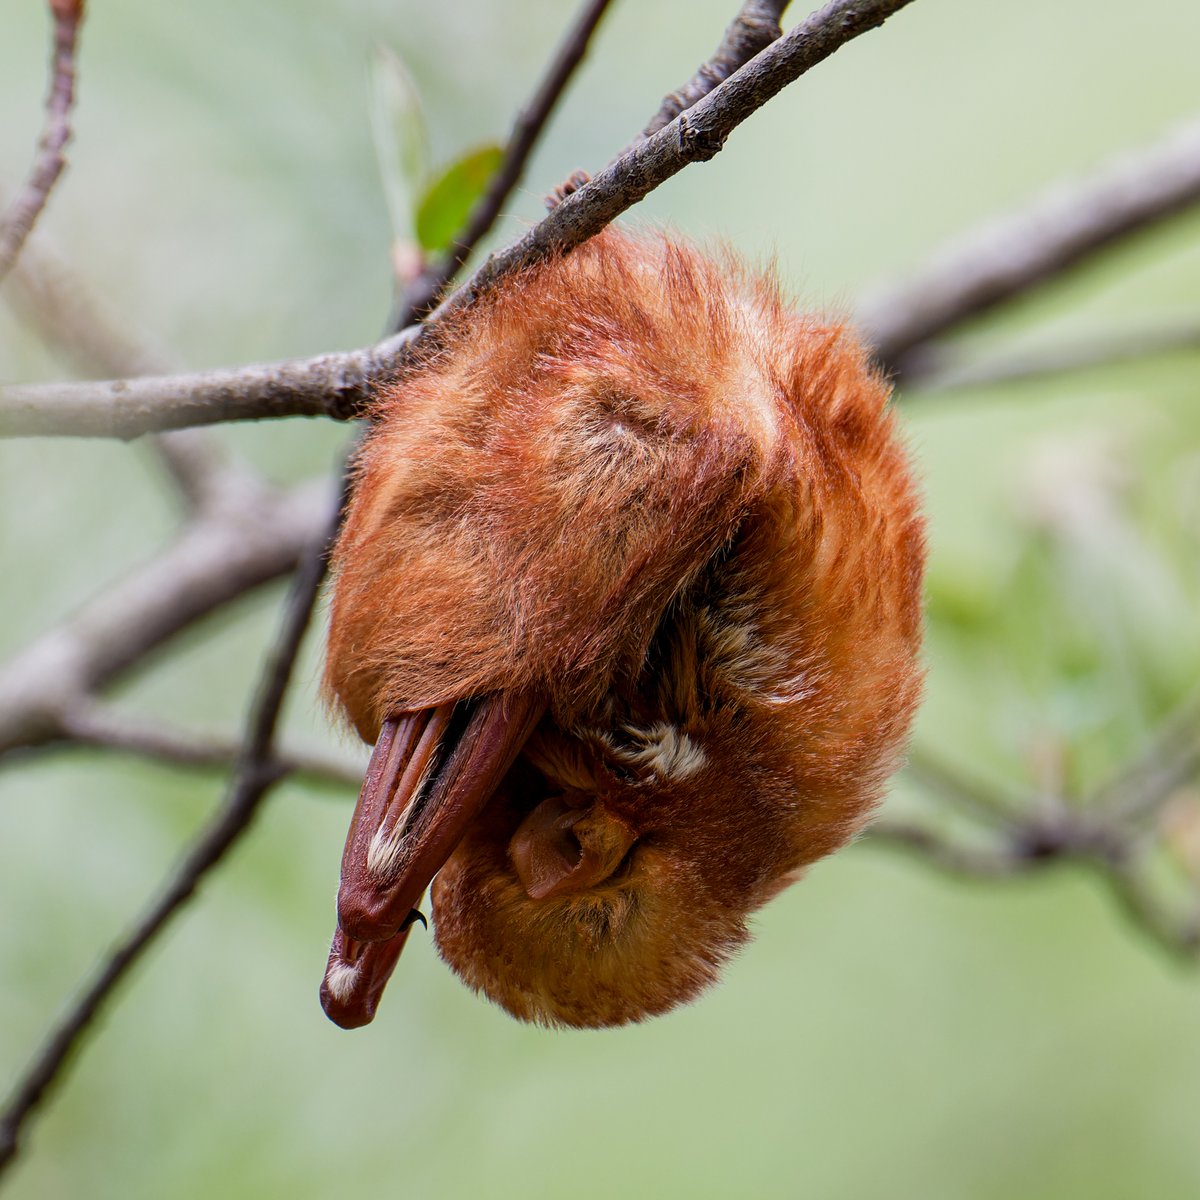 Eastern Red Bat asleep in the Central Park Ramble yesterday